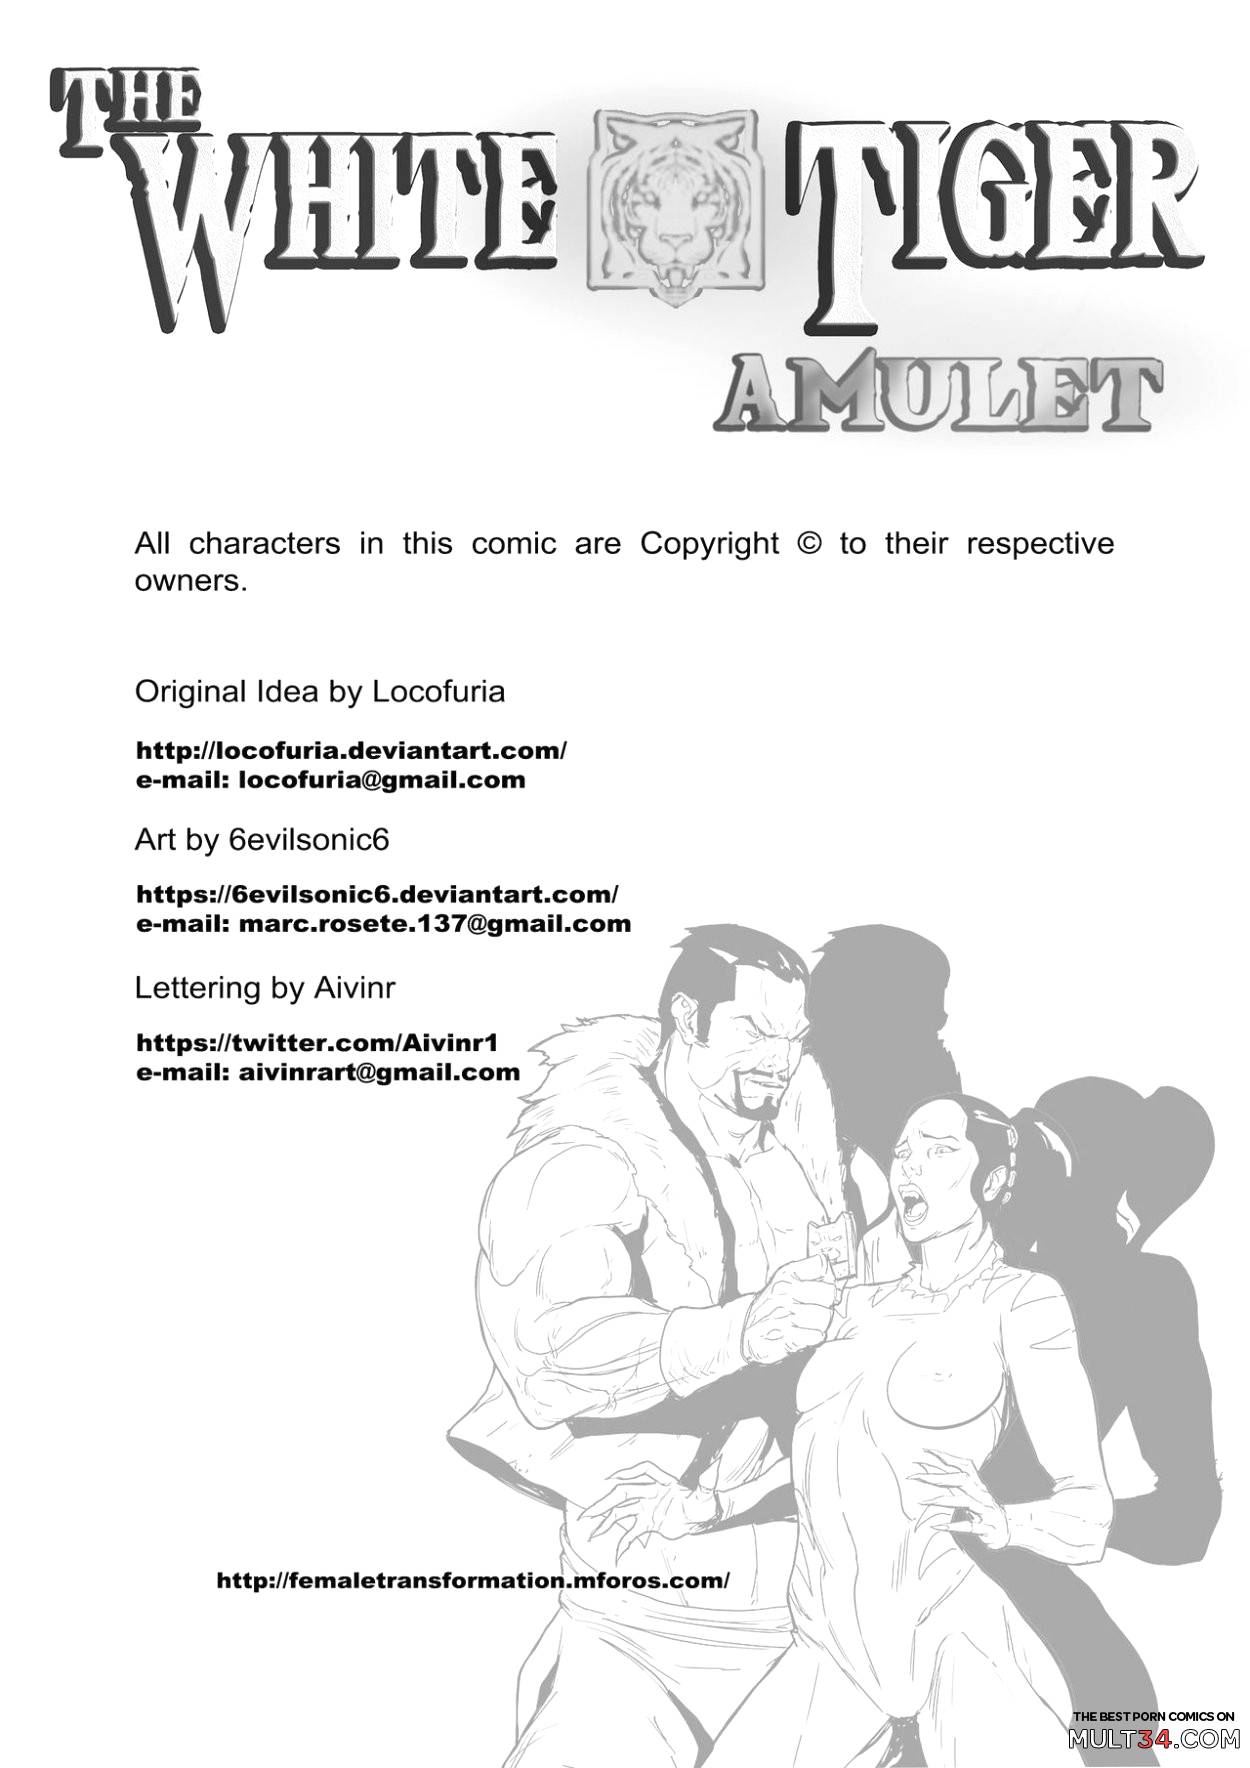 The White Tiger Amulet #2 page 3